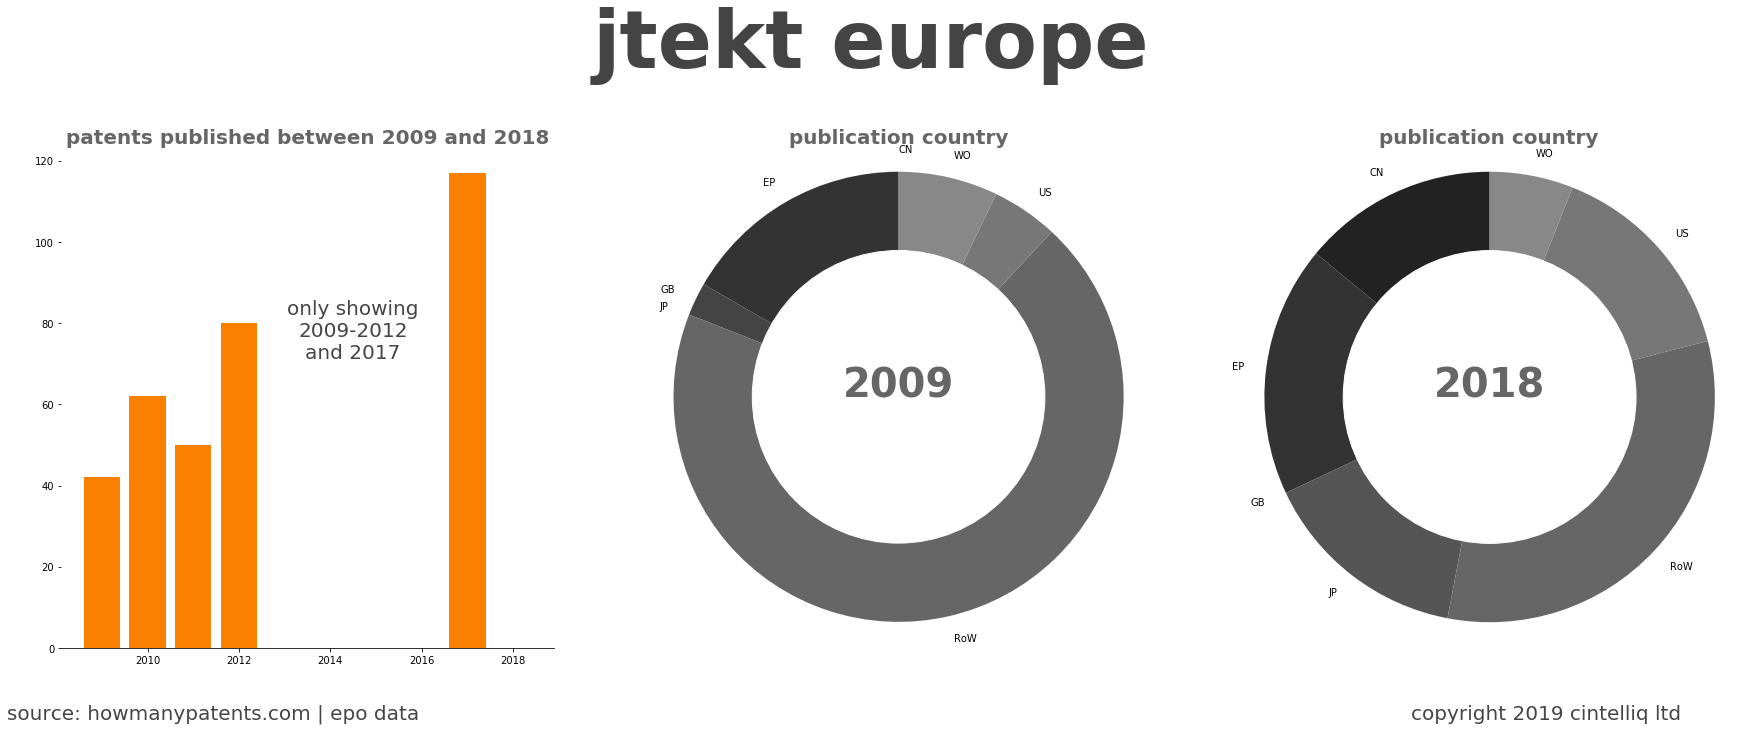 summary of patents for Jtekt Europe